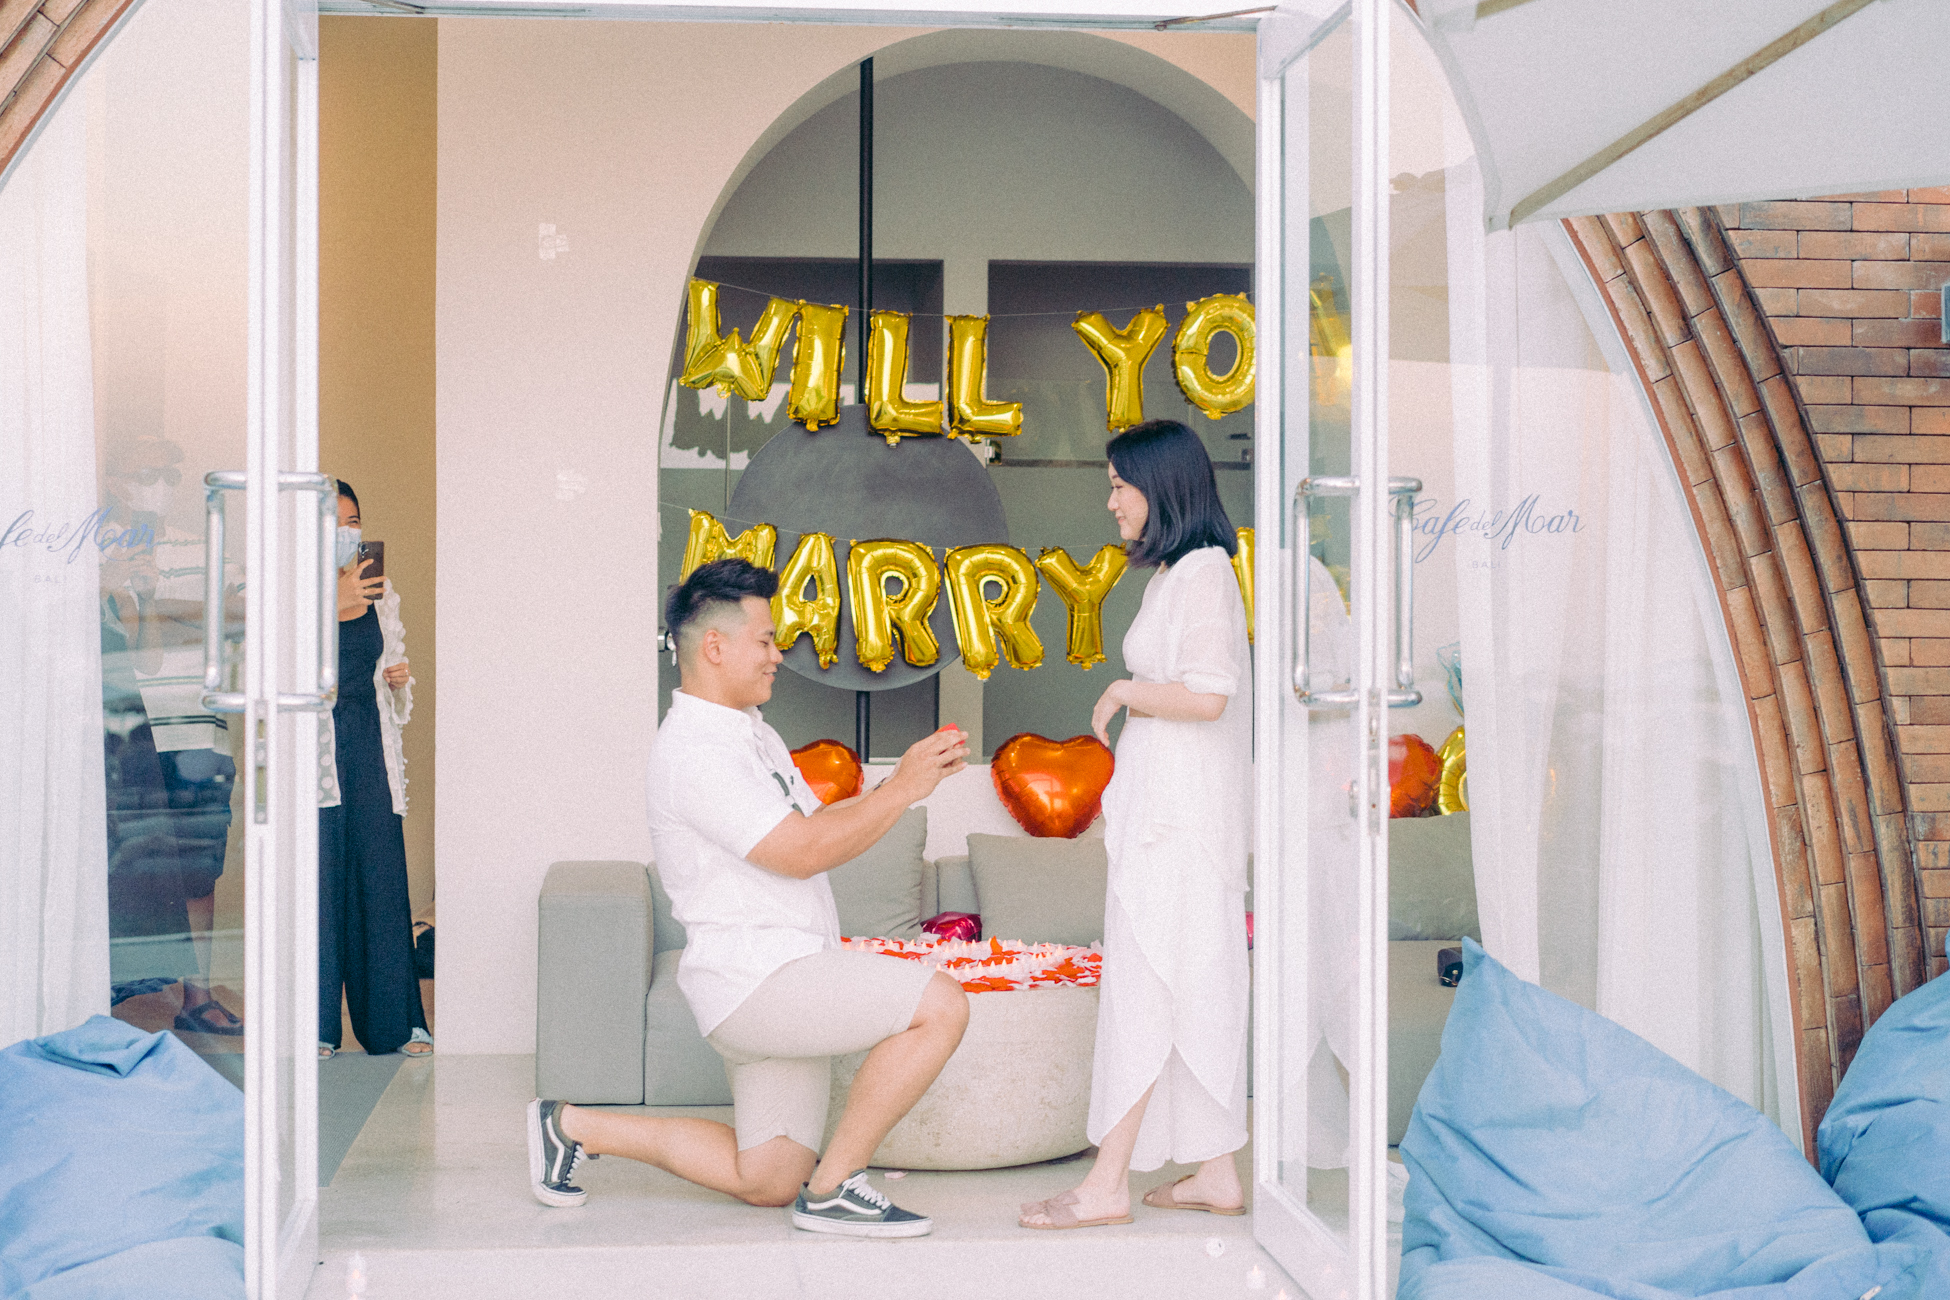 The man down on knee to propose the woman in white outfit on suite room on The couple walk through the entrance pathway on pre-wedding proposal photo session